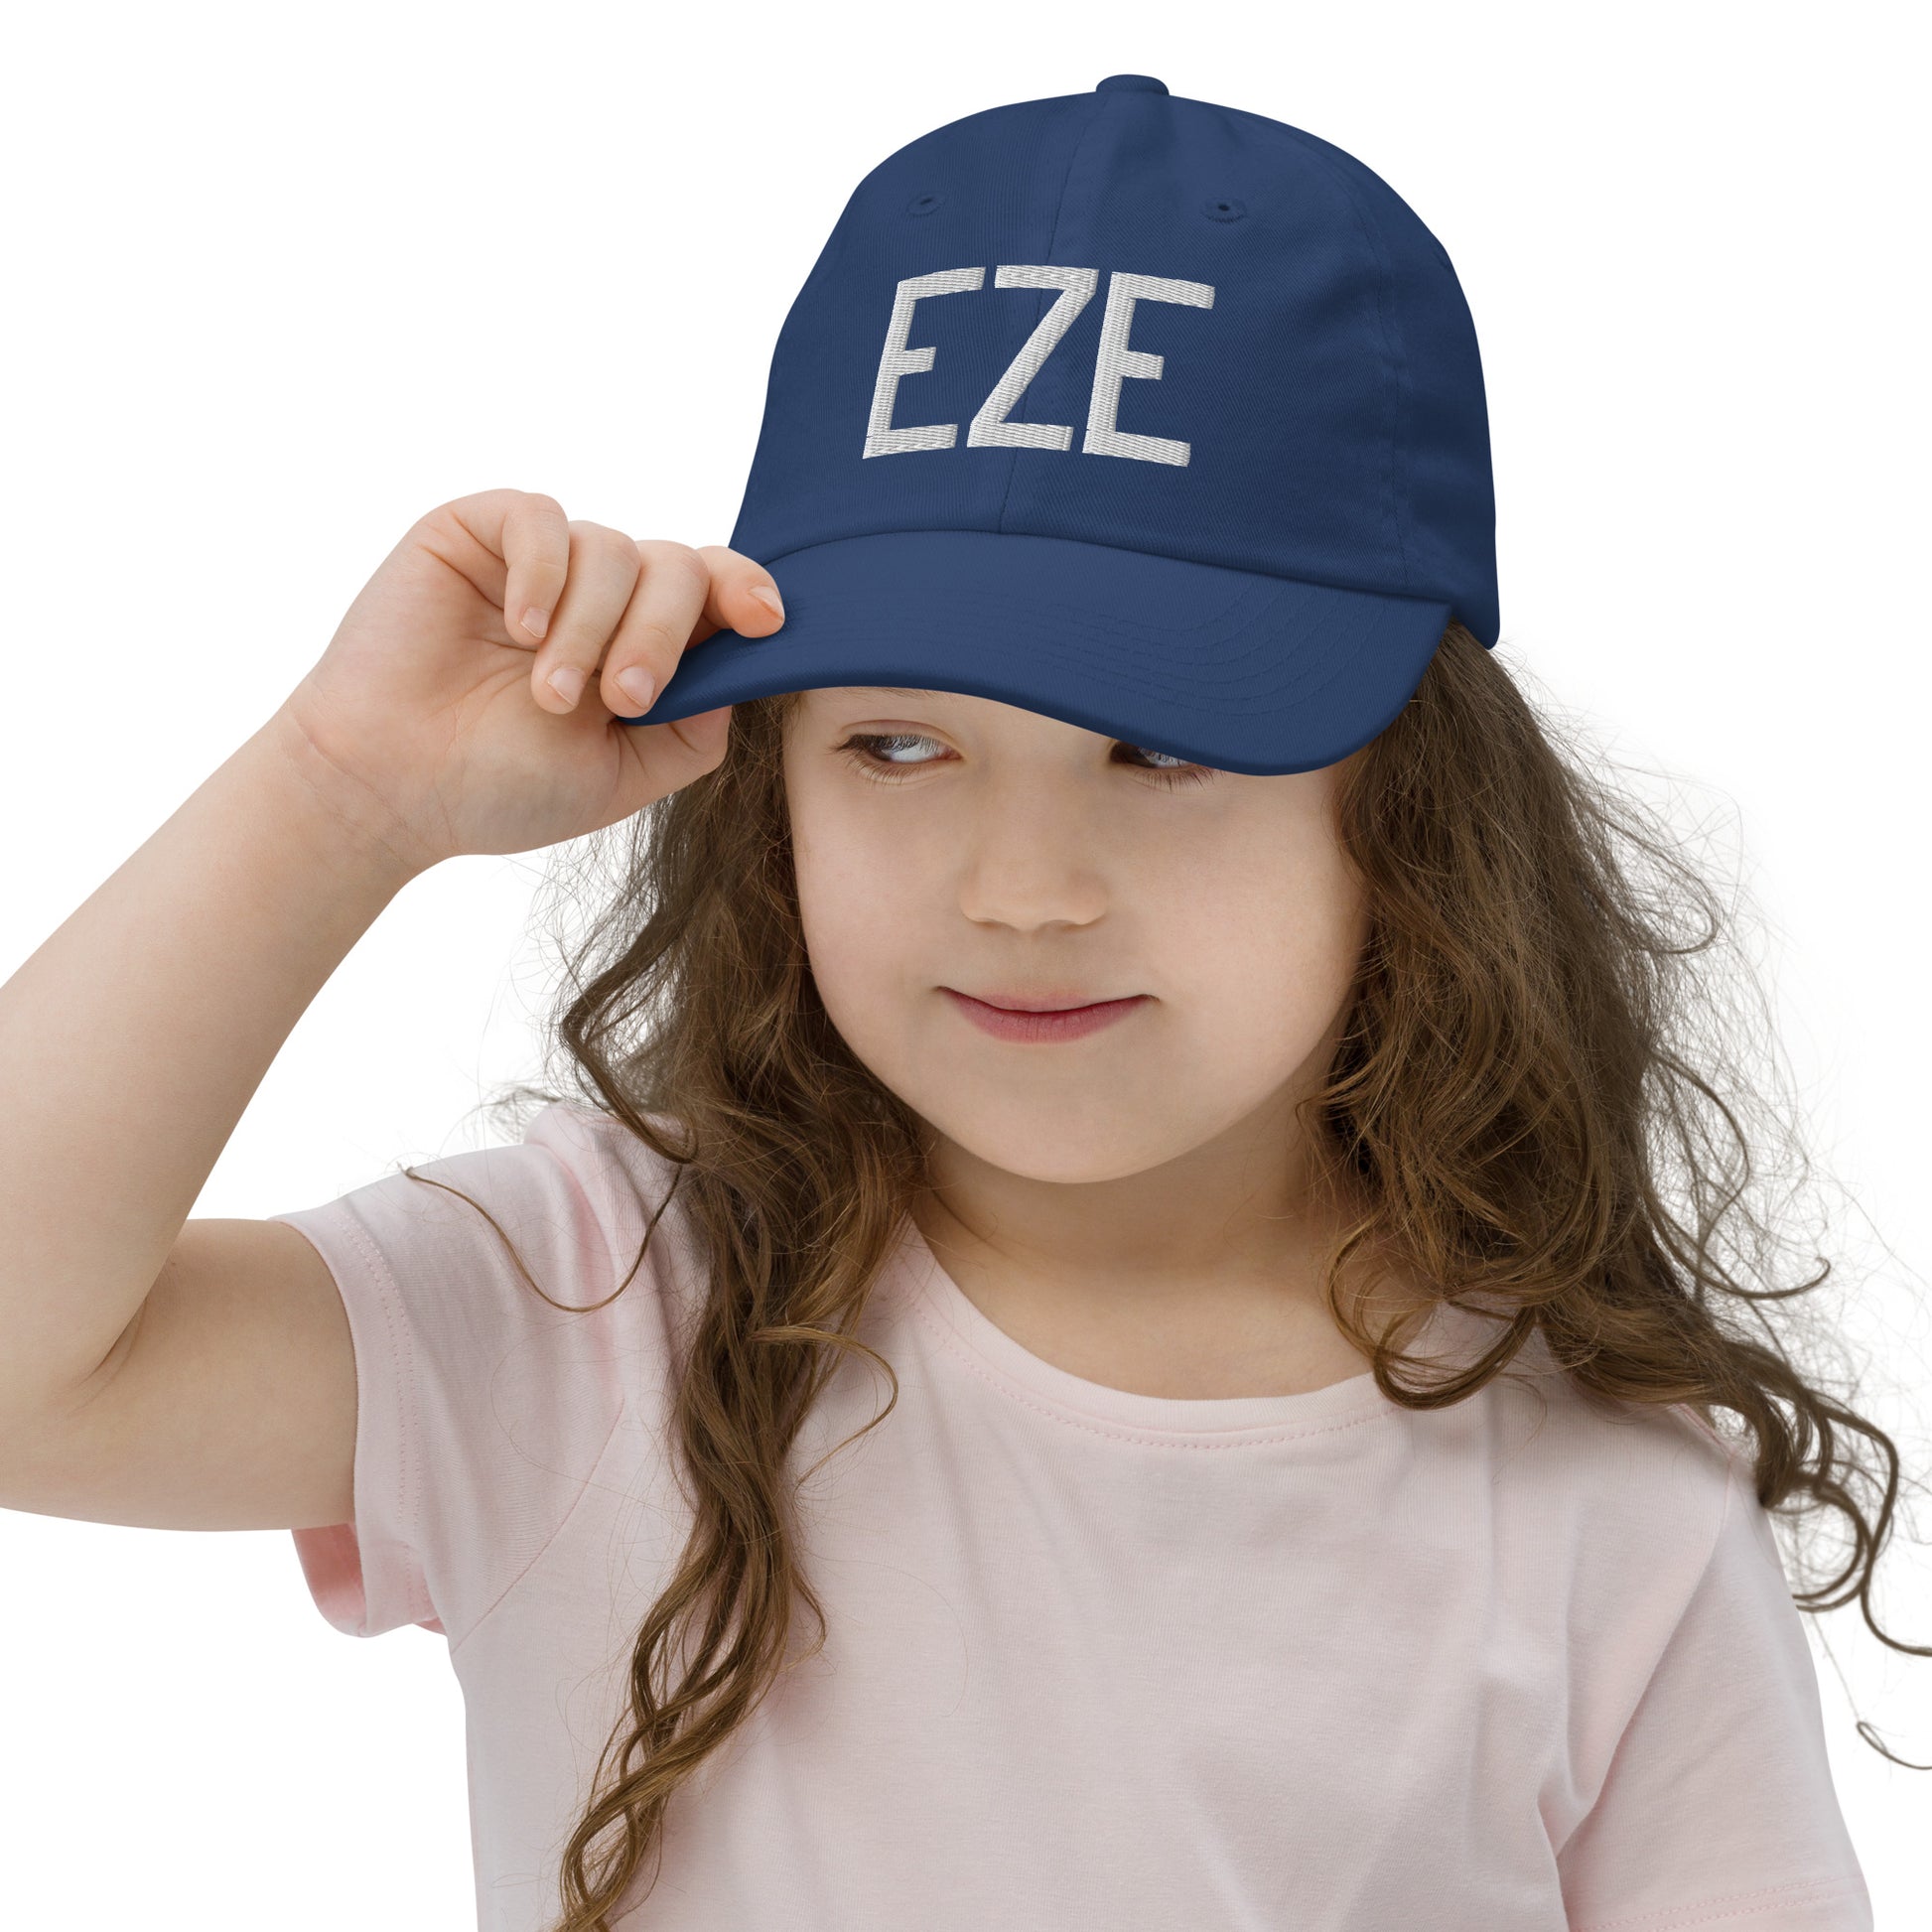 Airport Code Kid's Baseball Cap - White • EZE Buenos Aires • YHM Designs - Image 05